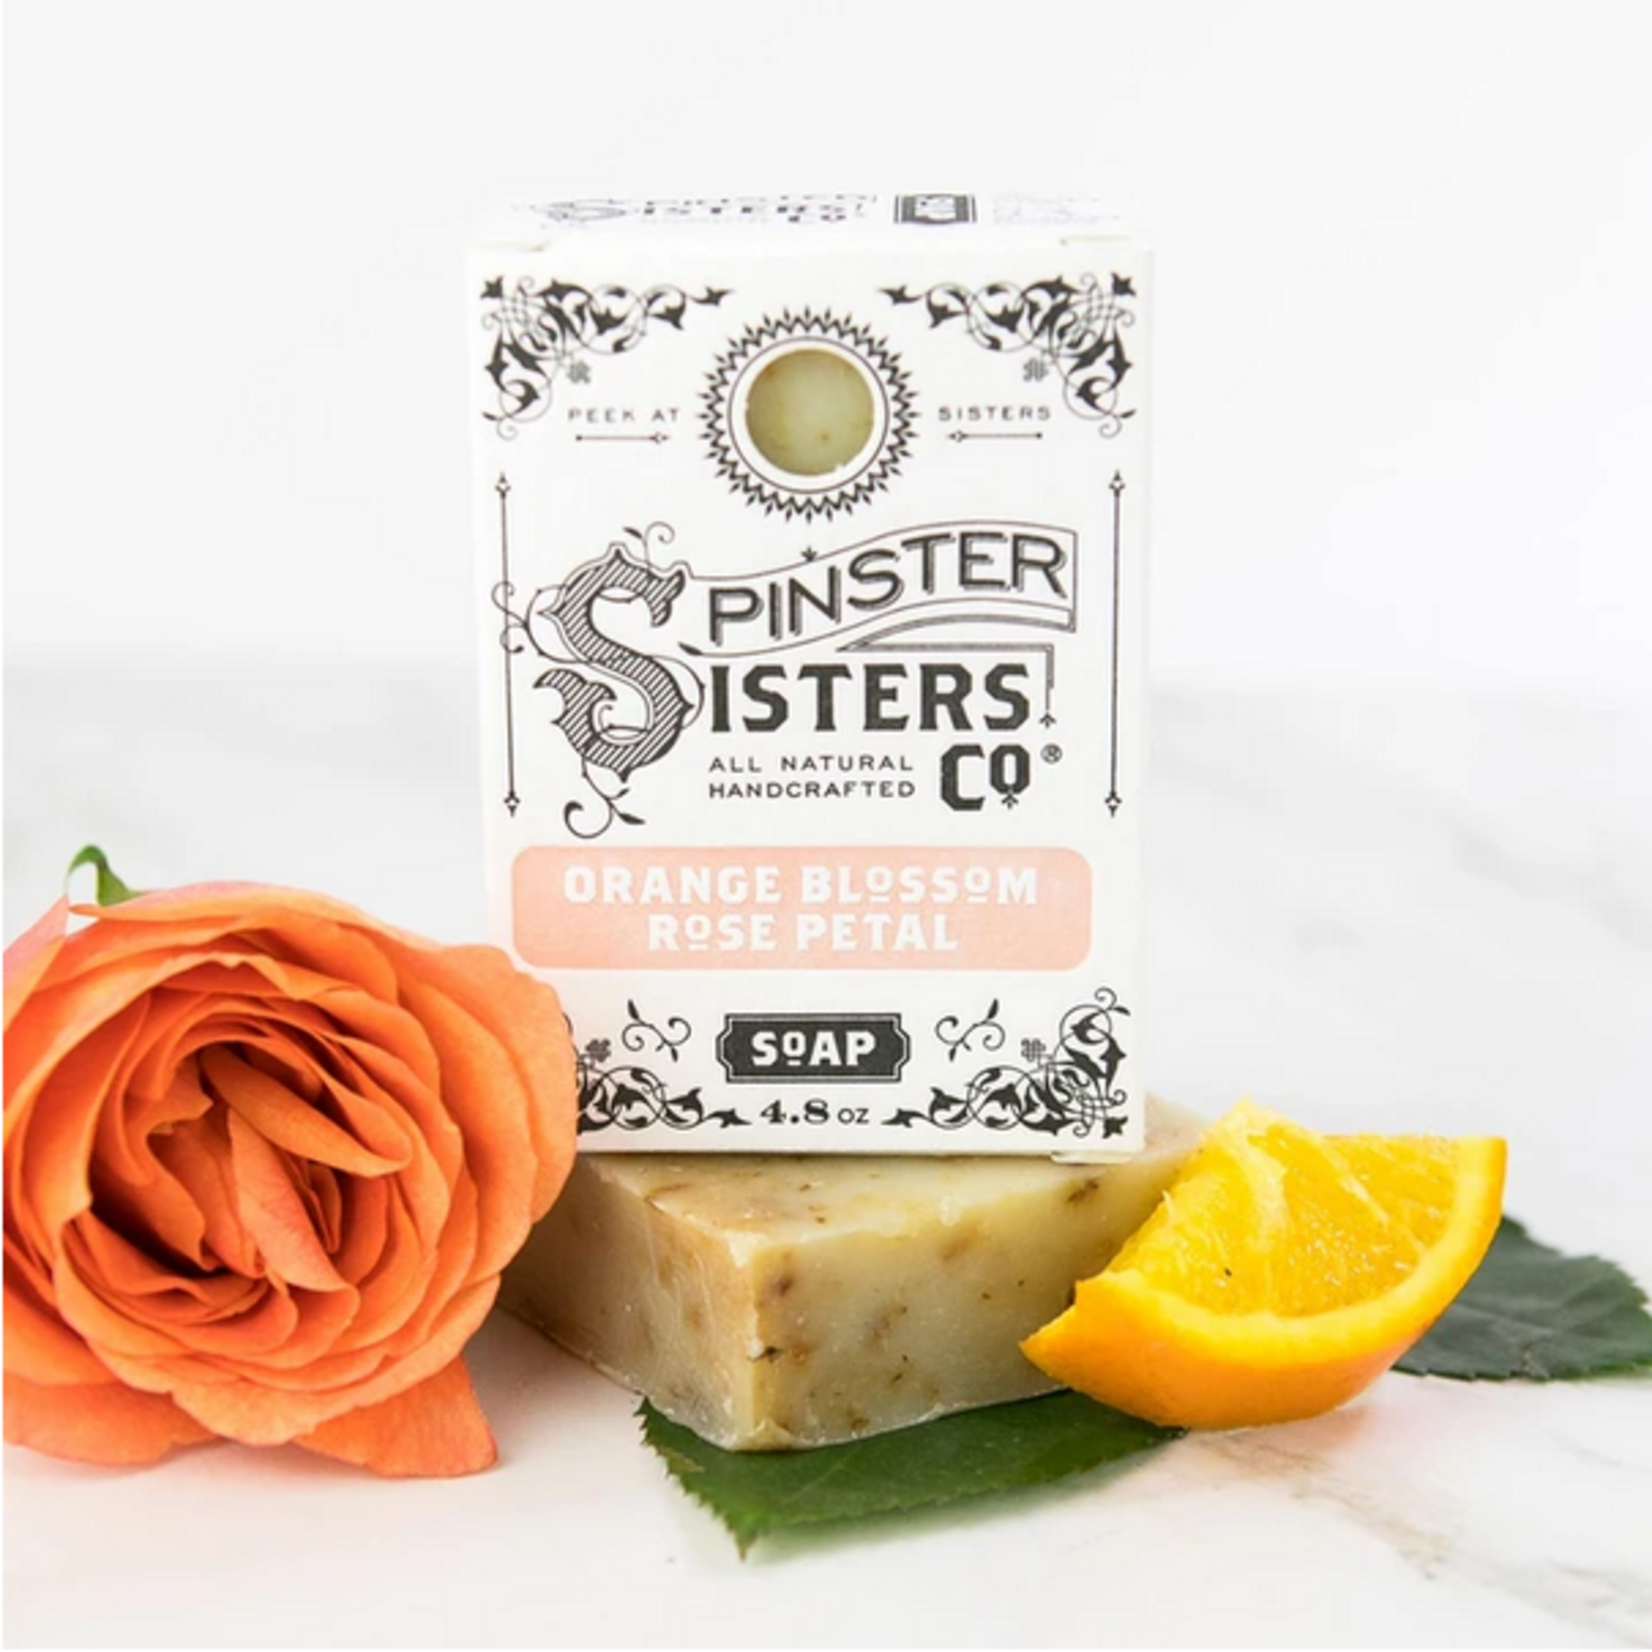 Spinster Sisters Co. Spinster Sisters Co. Bar Soap